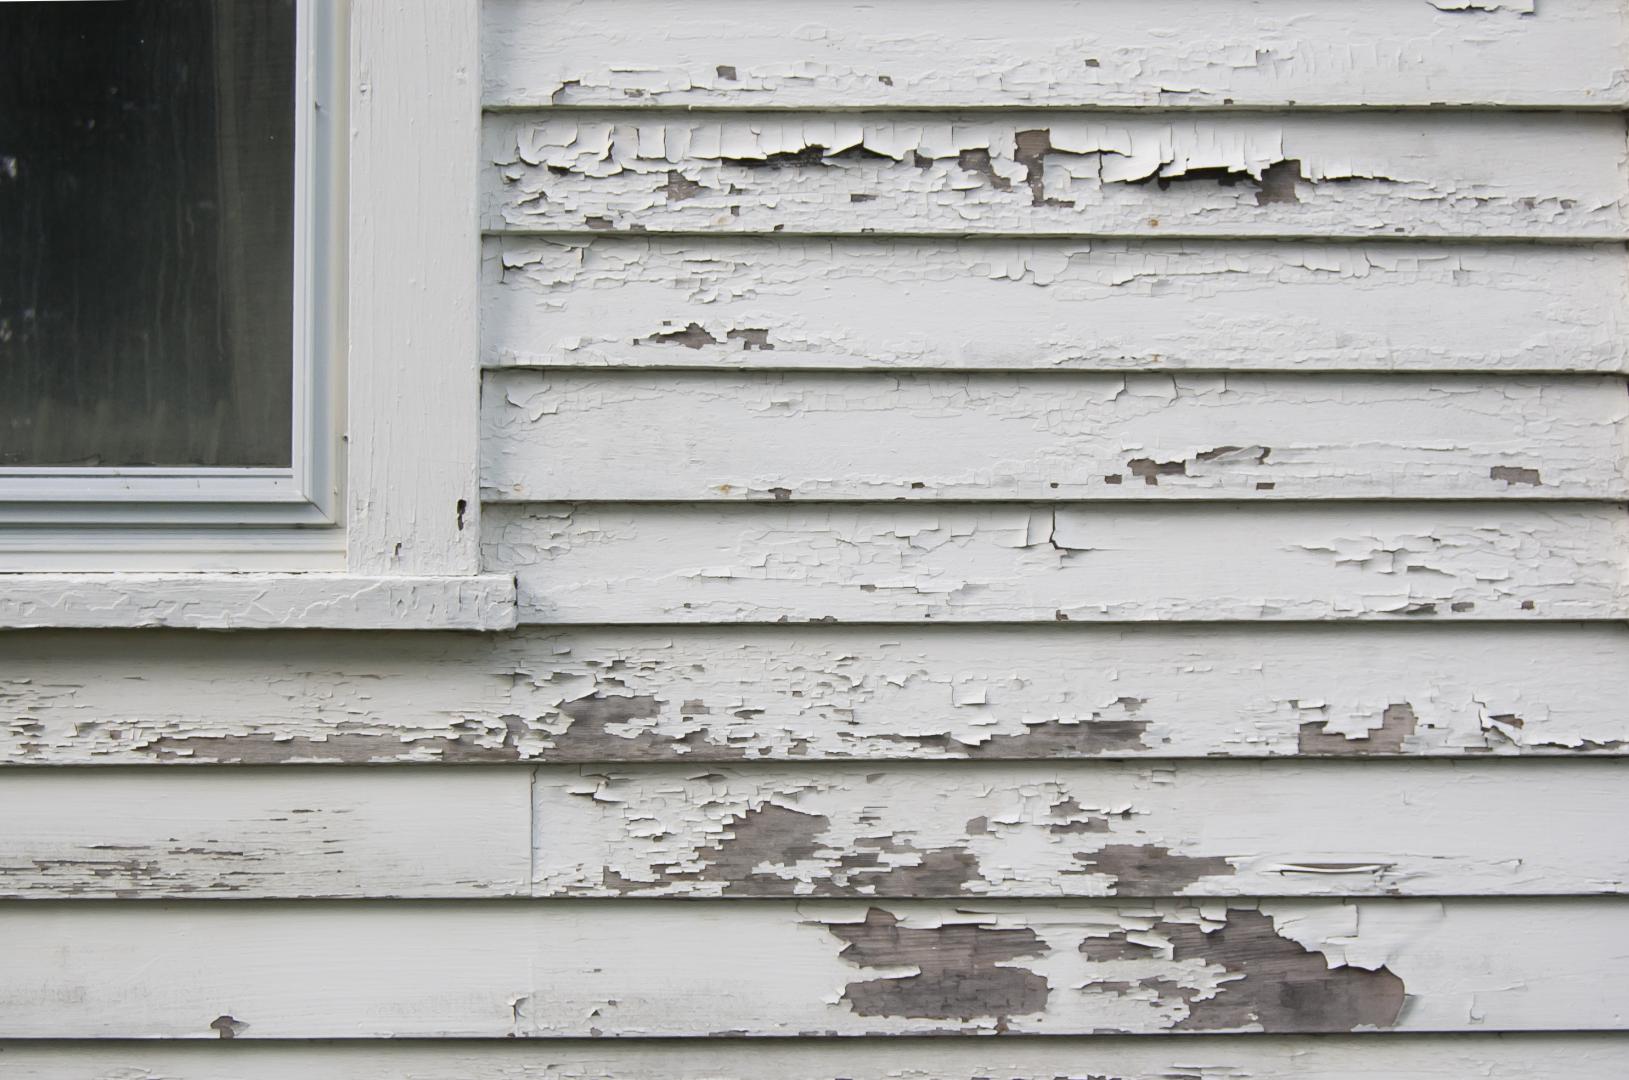 THD Awarded $1.2 Million Grant To Protect Families From Lead Hazards